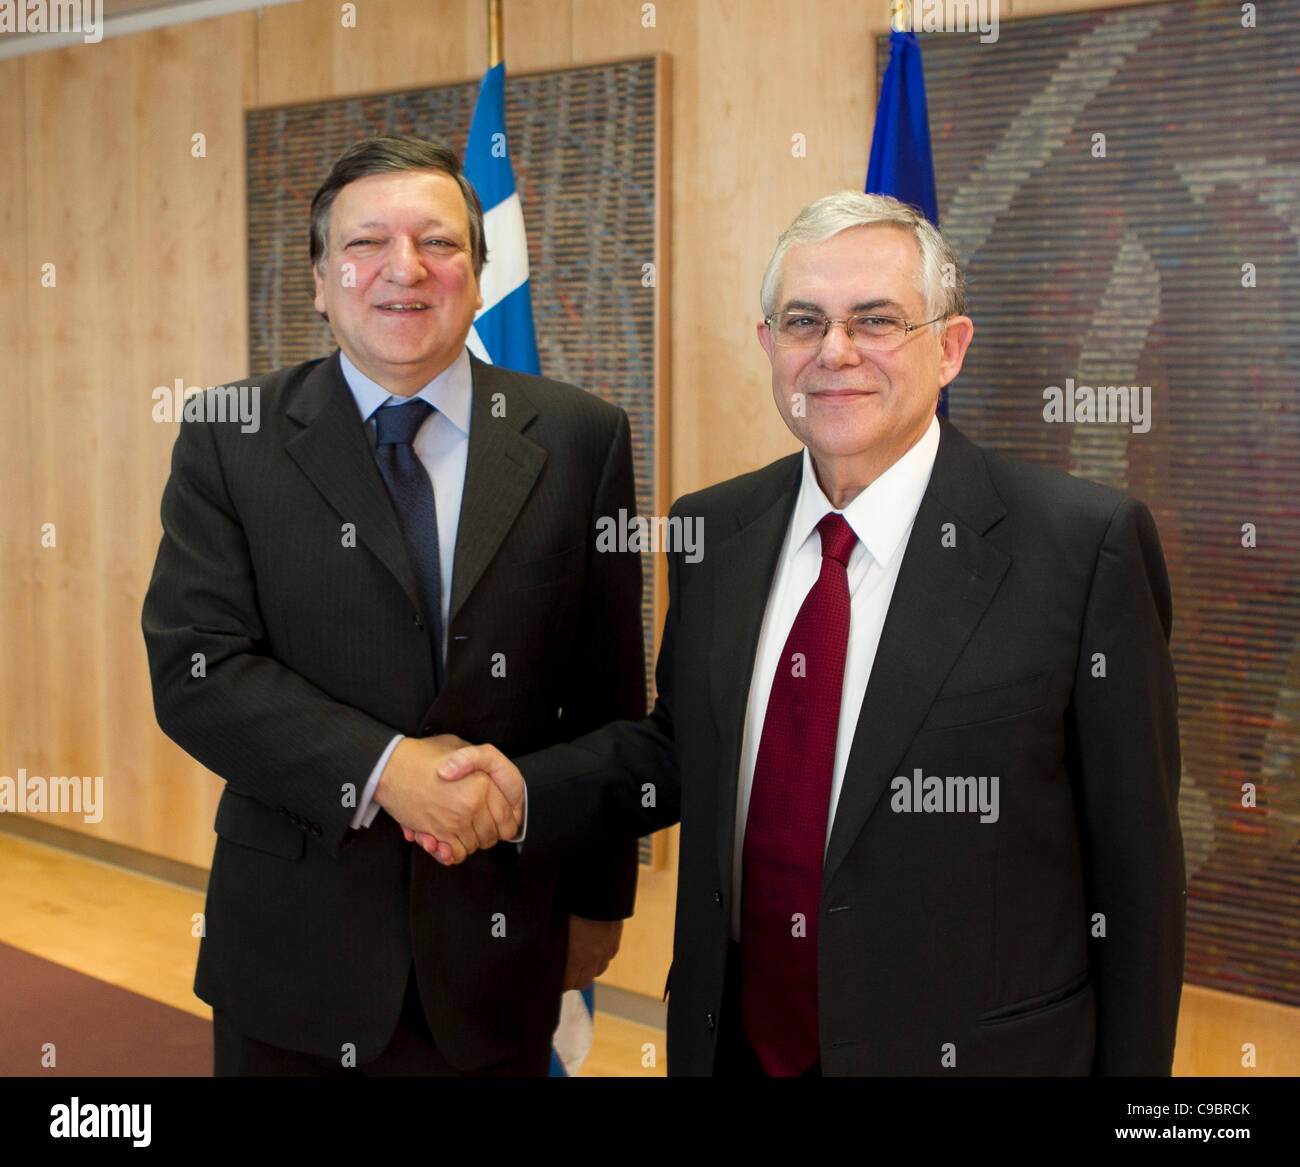 Newly elected Prime Minister of Greece, Lucas Papademos (on the right), pictured during his first meeting with the European Commission President,  Jose Manuel Barroso. Stock Photo